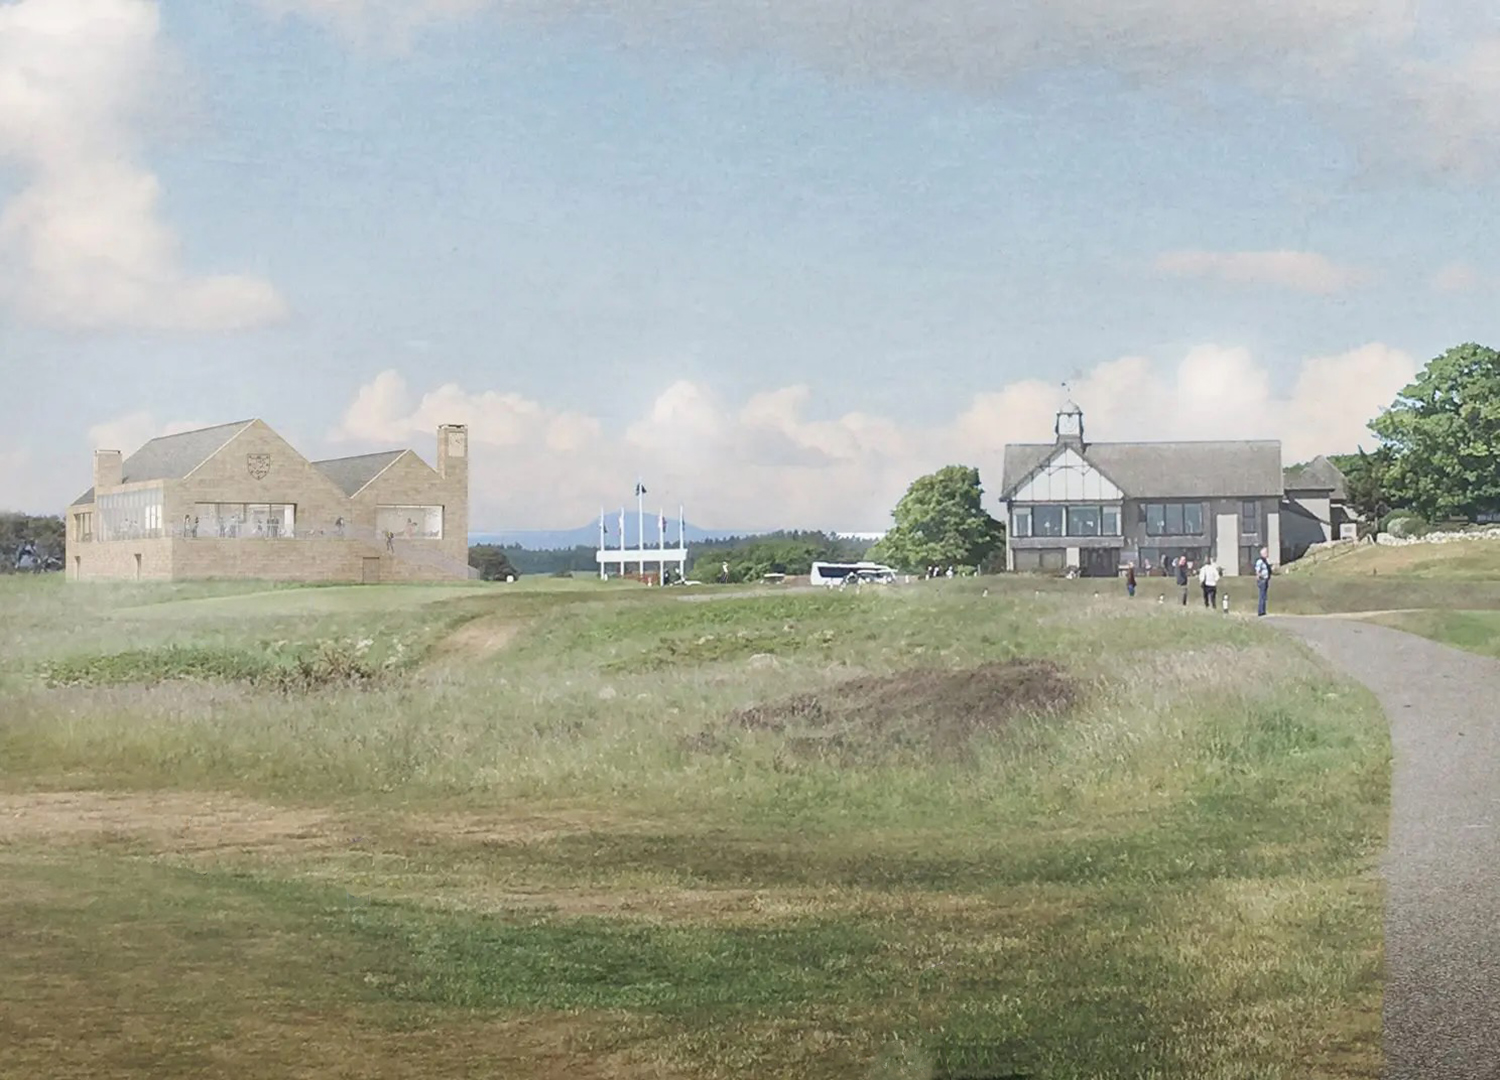 Work to start on new clubhouse for Royal Dornoch Golf Club